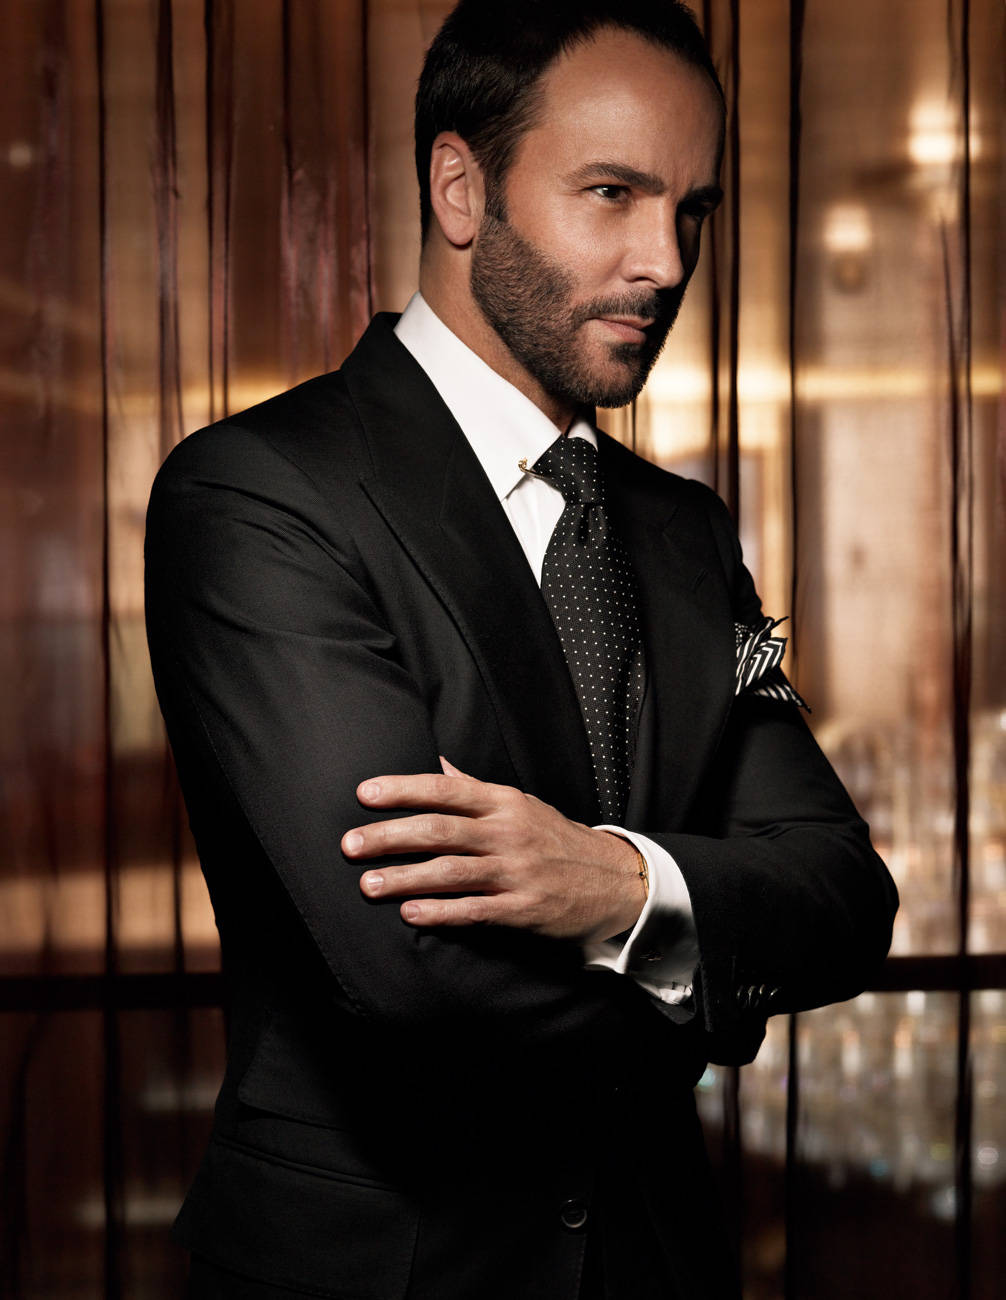 Tom Ford With Folded Arms Wallpaper